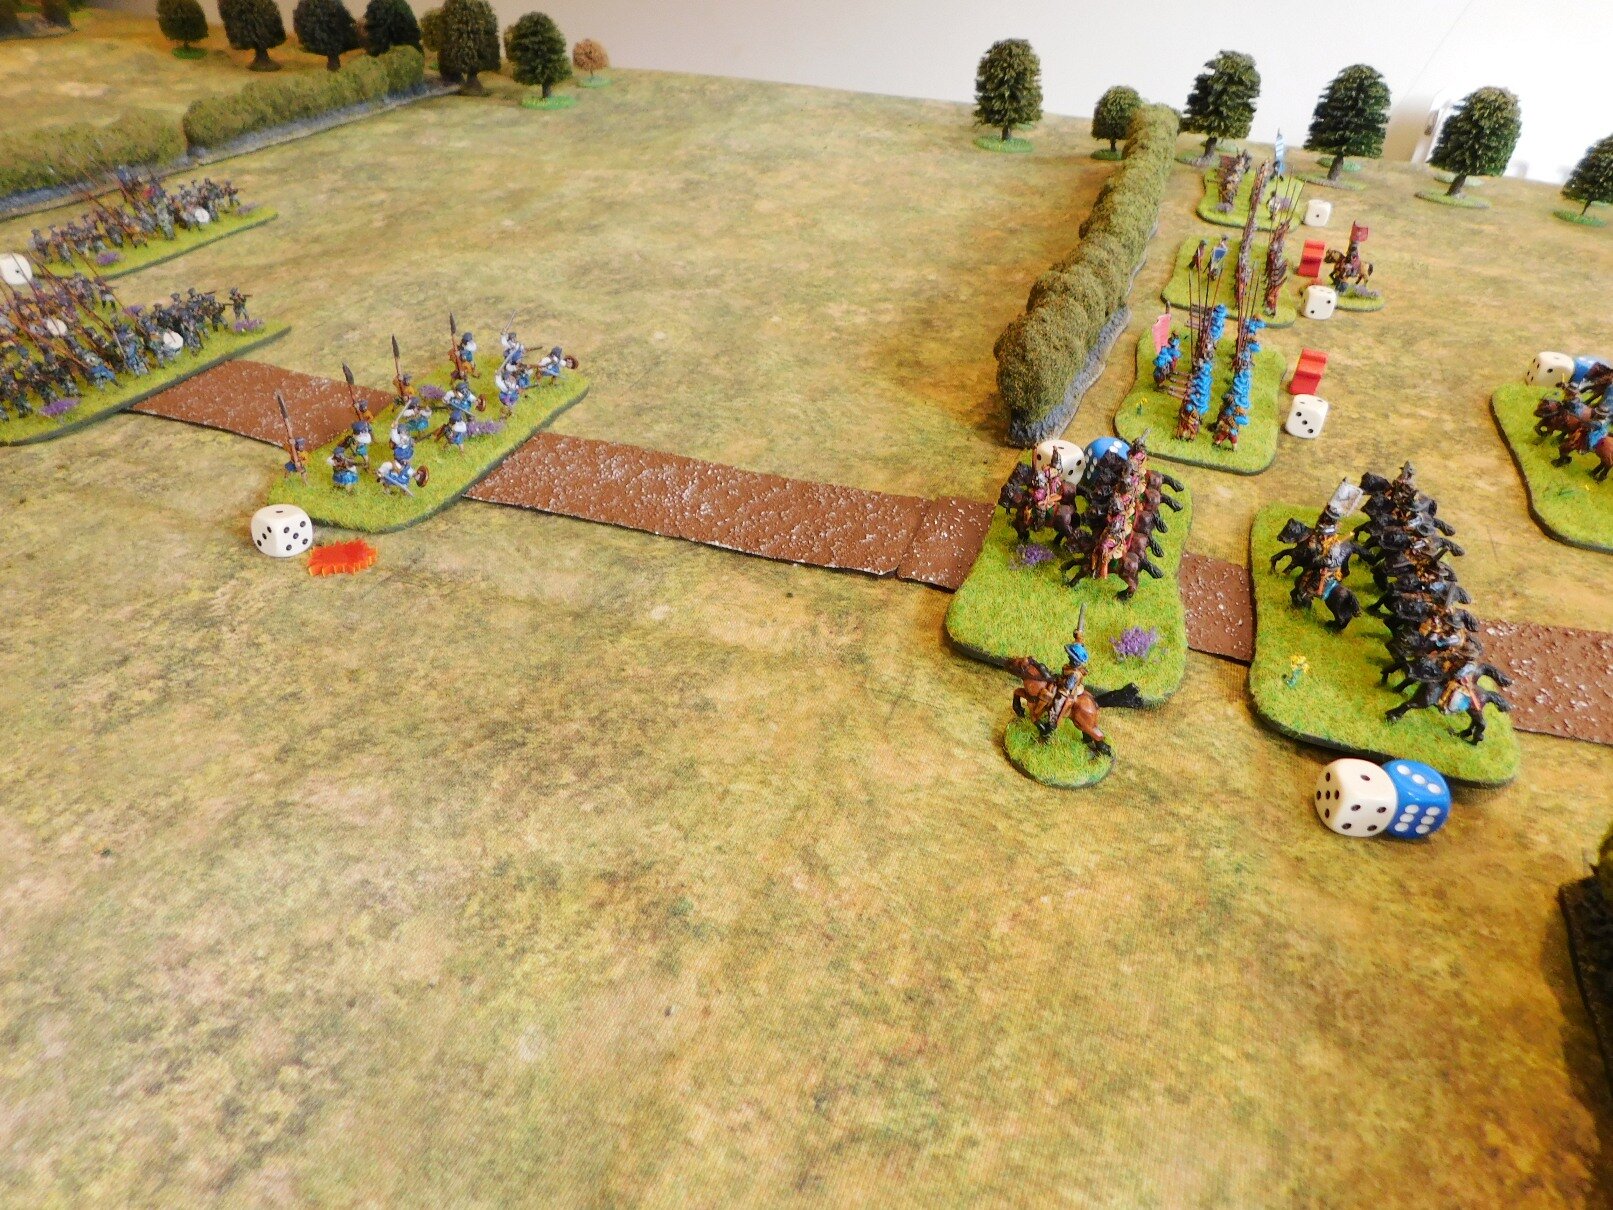 The Highlanders and the Royalist Horse Face Off To One Another